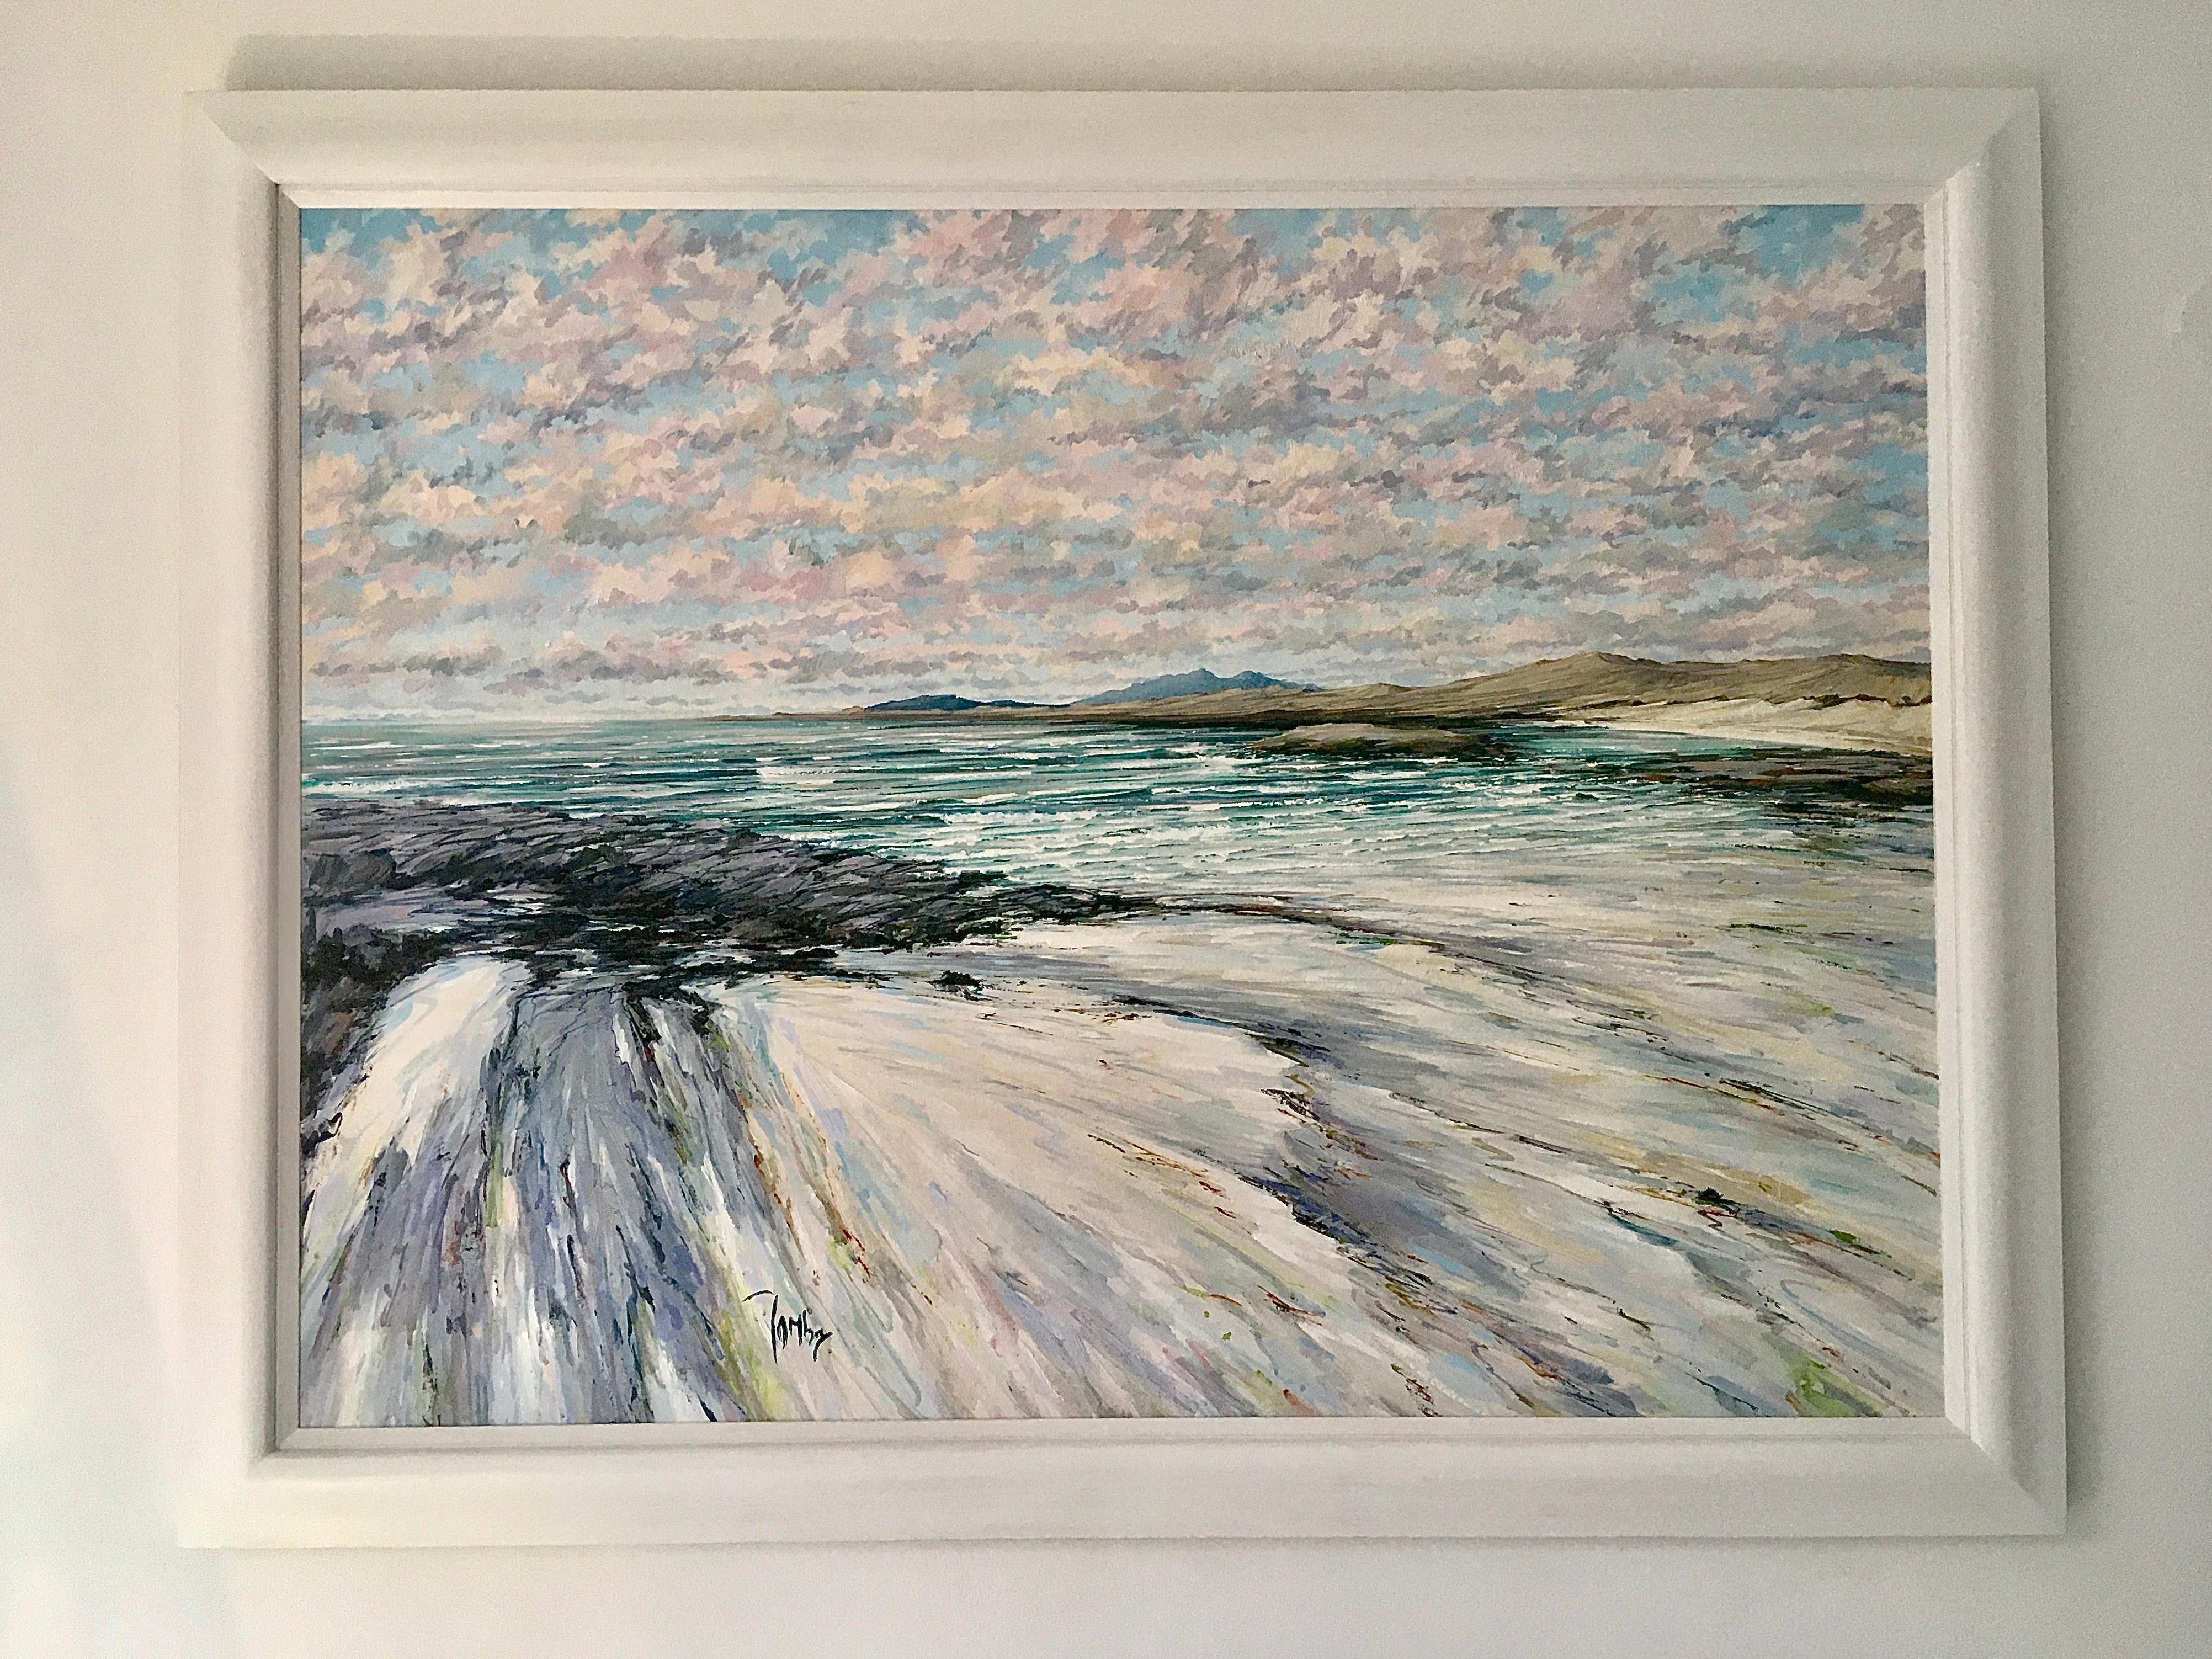 Across the Bay - seascape landscape beach painting oil coastal modern abstract - Painting by Tom Barron